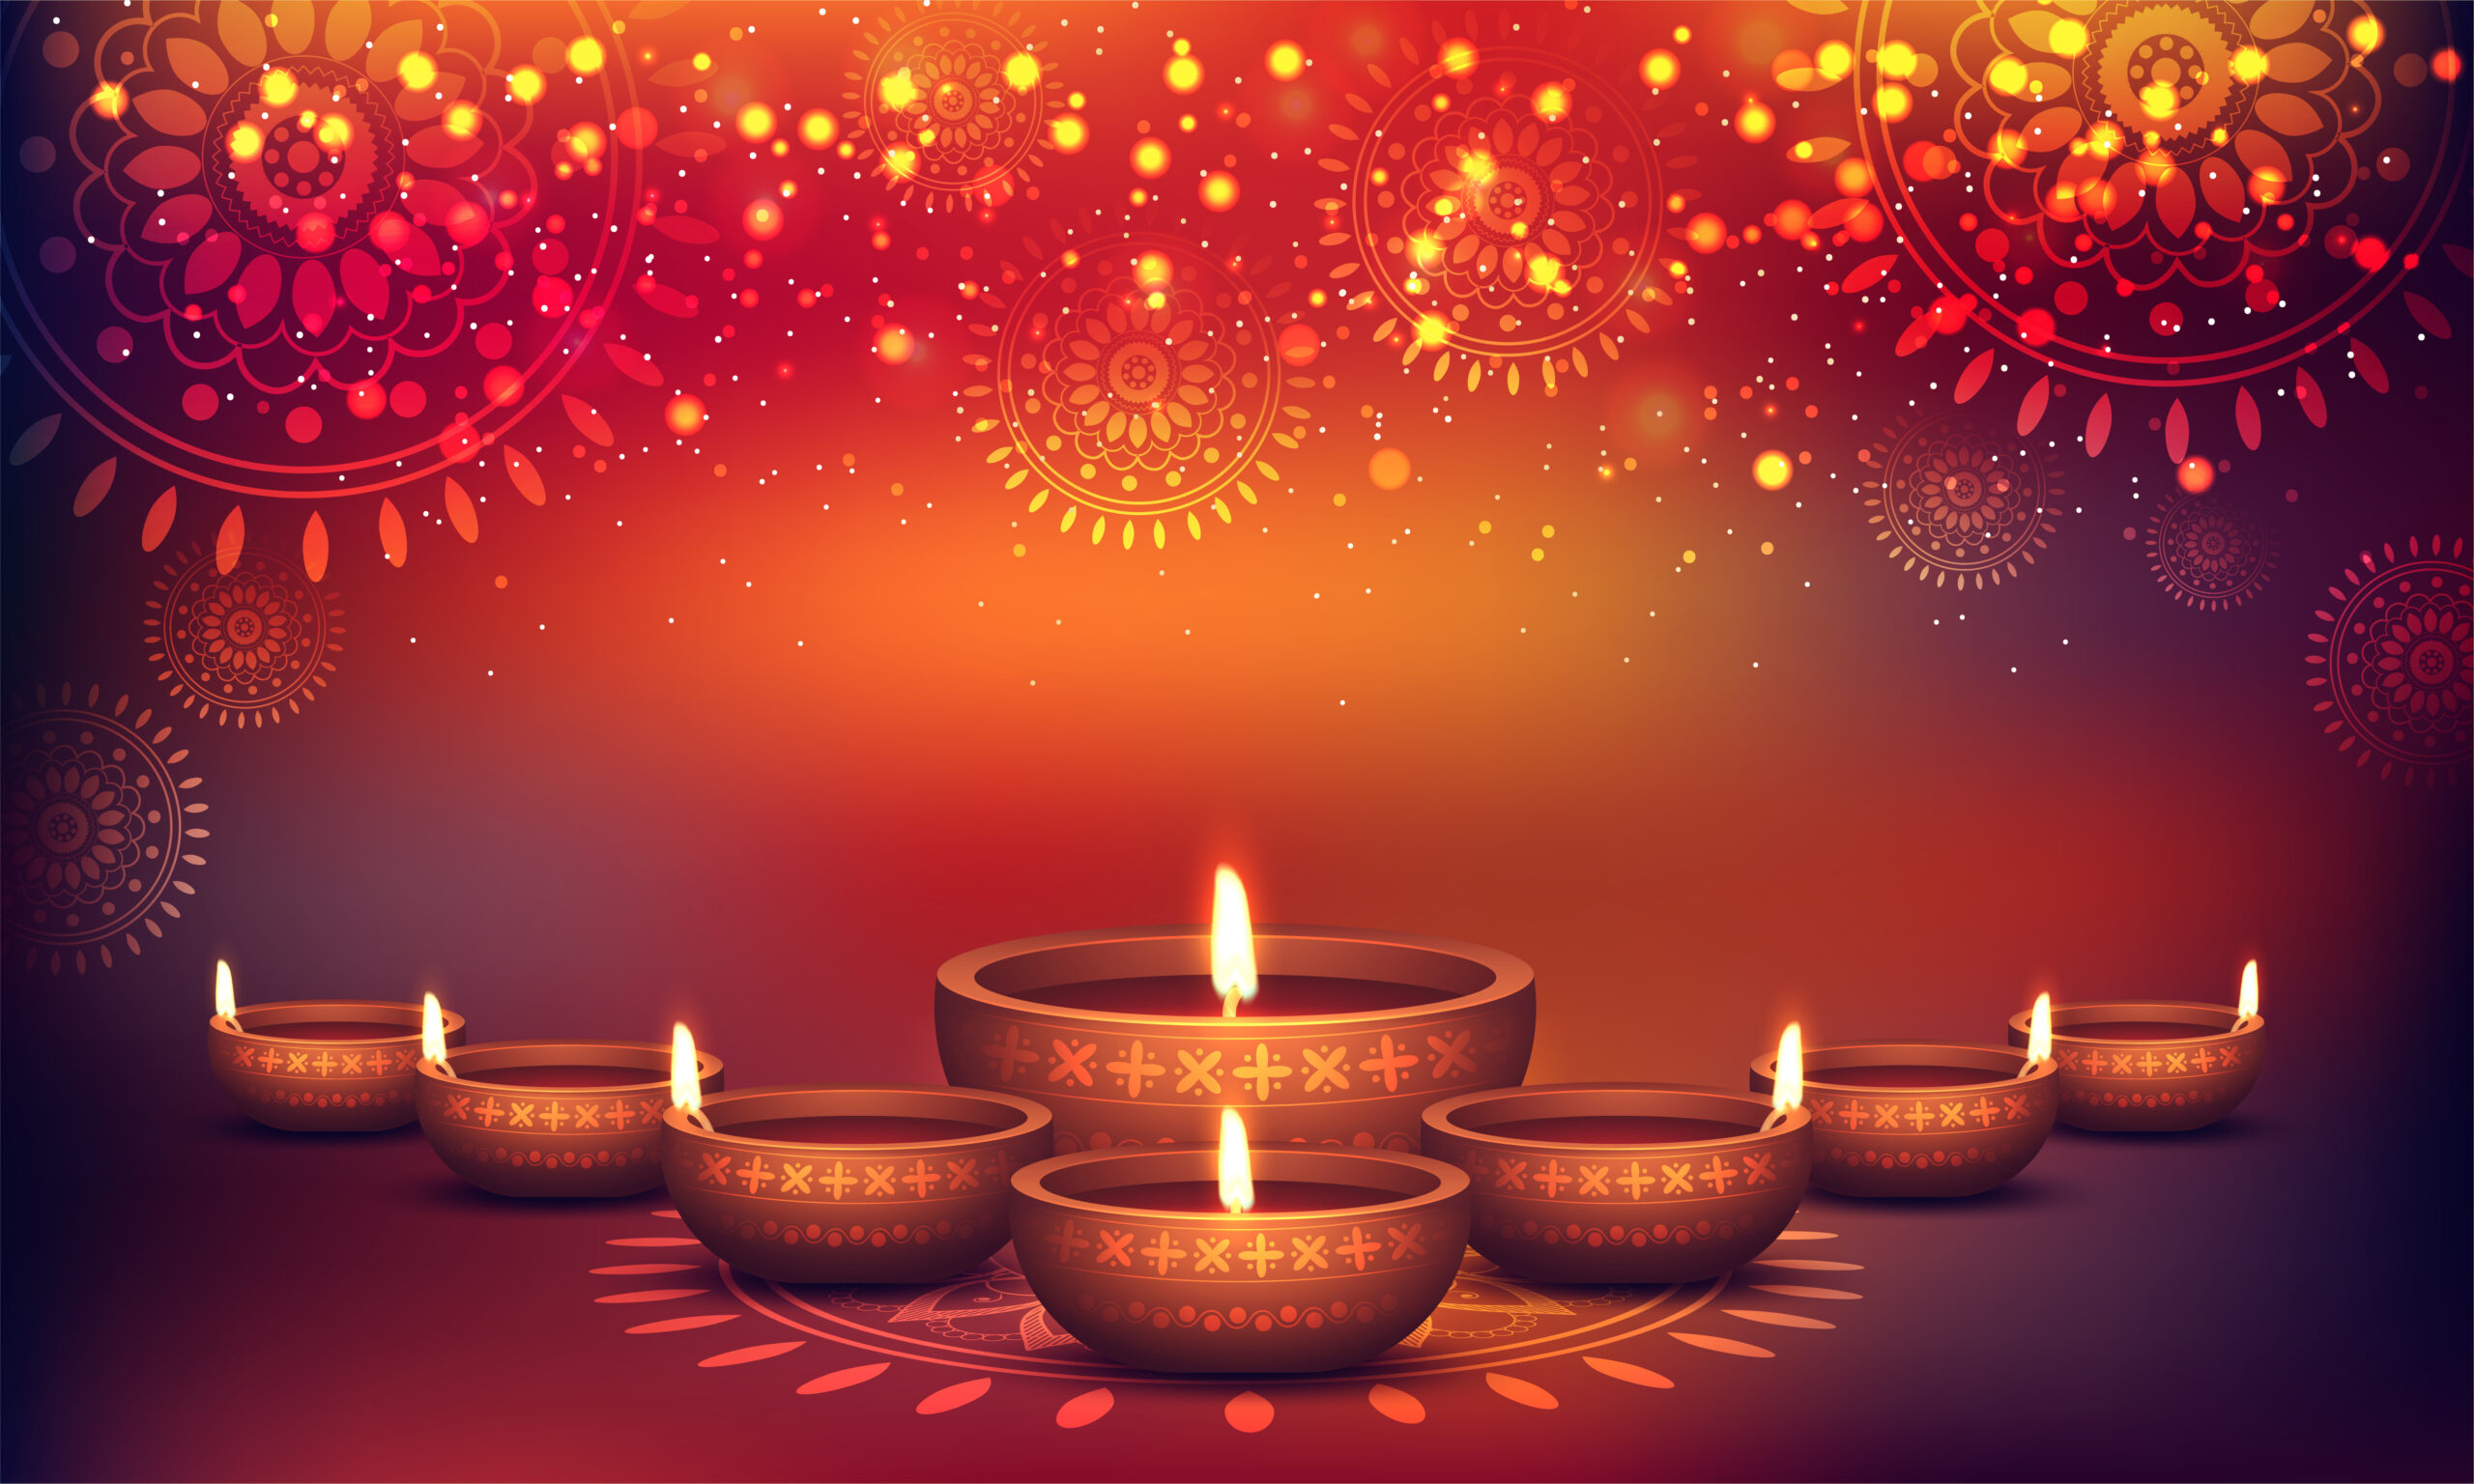 Pictures Of Diwali